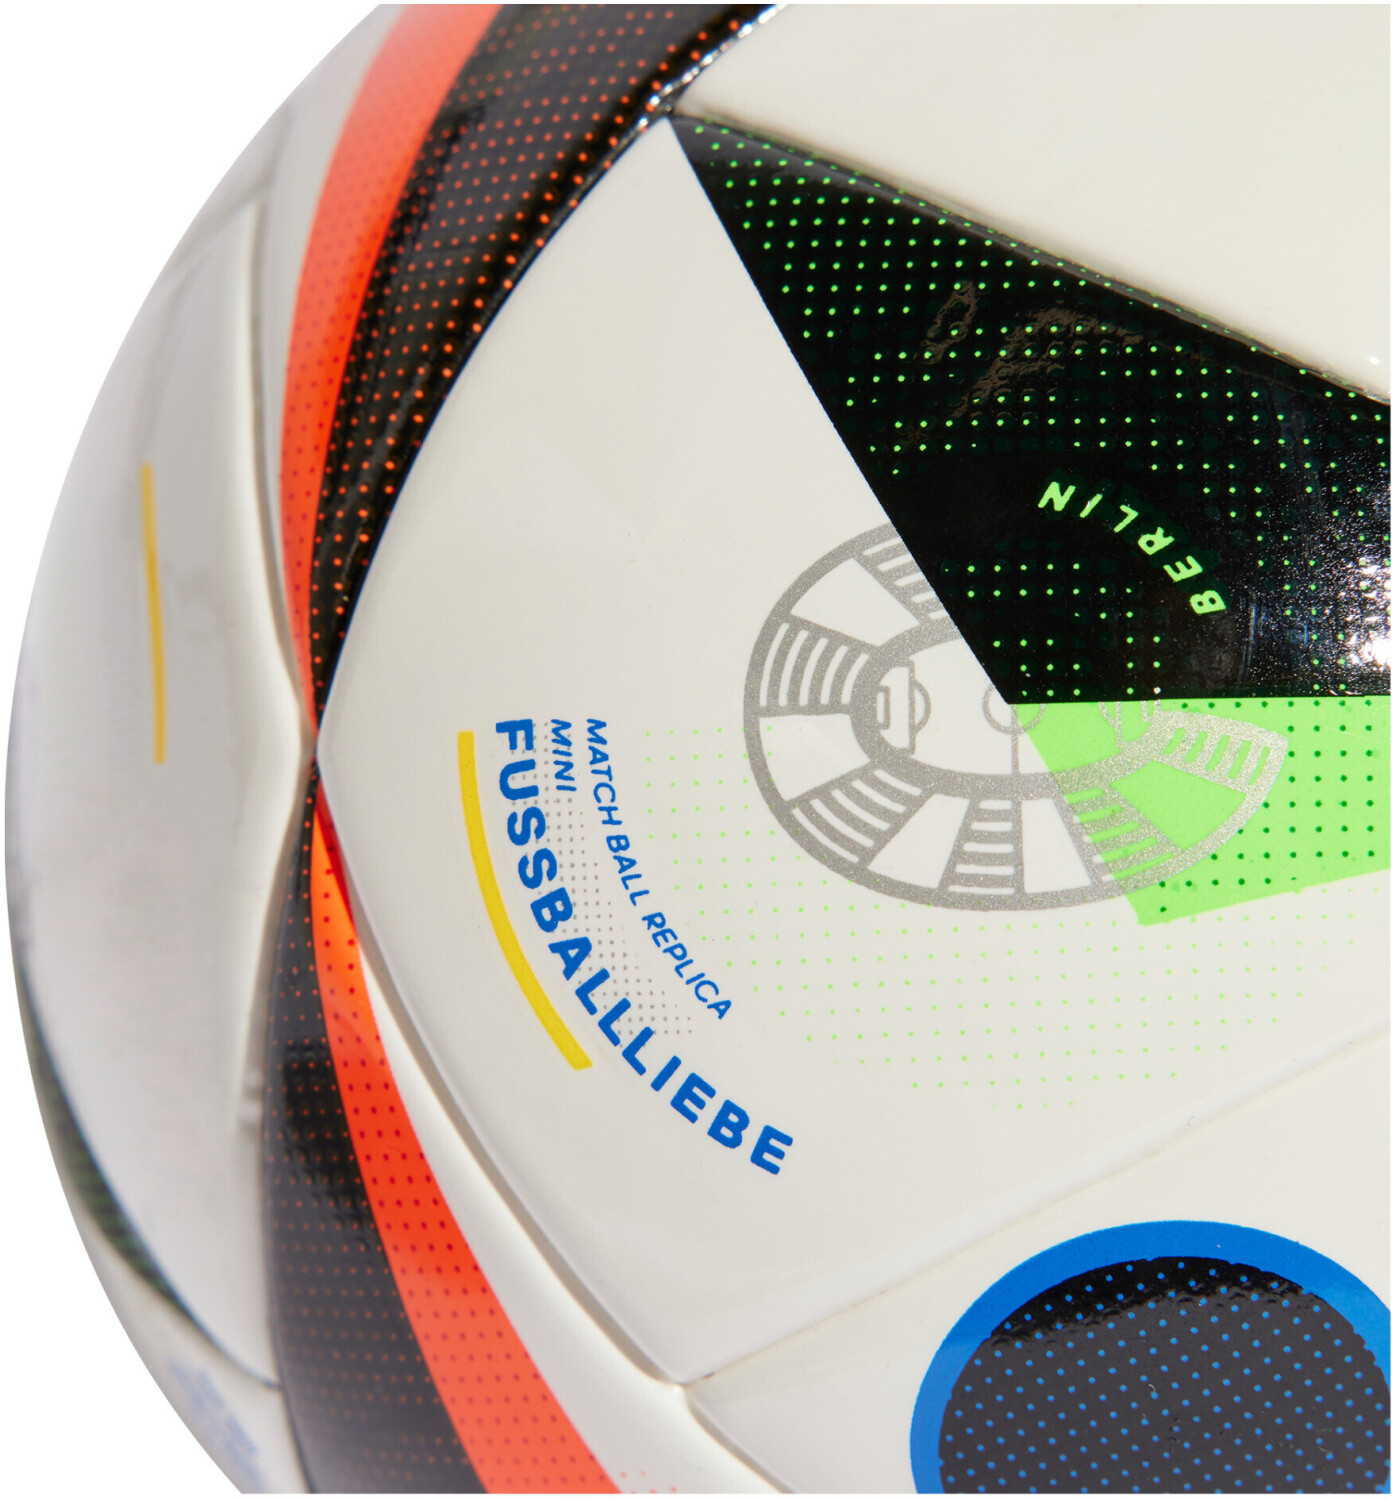 Deals £10.99 from on (Today) – Fußballliebe Adidas (EURO24) Buy Best Mini